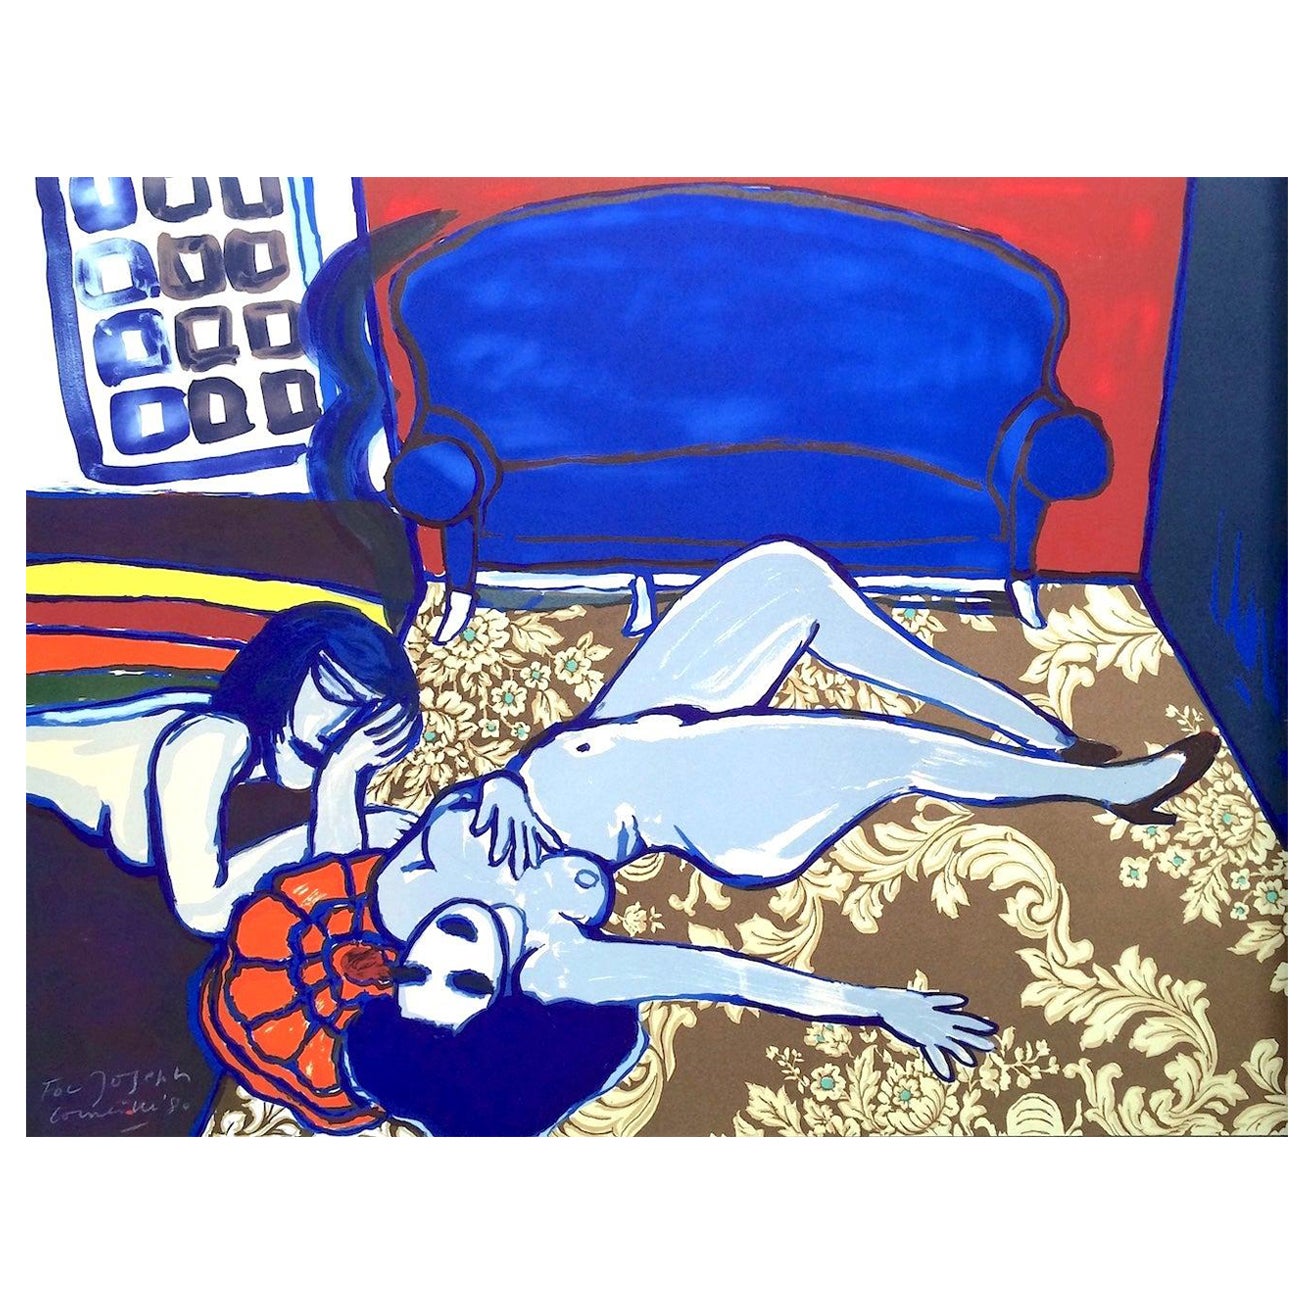 Corneille Nude Print - DEUX AMIES Signed Hand Drawn Lithograph, Female Nudes, Blue Sofa, Floral Rug